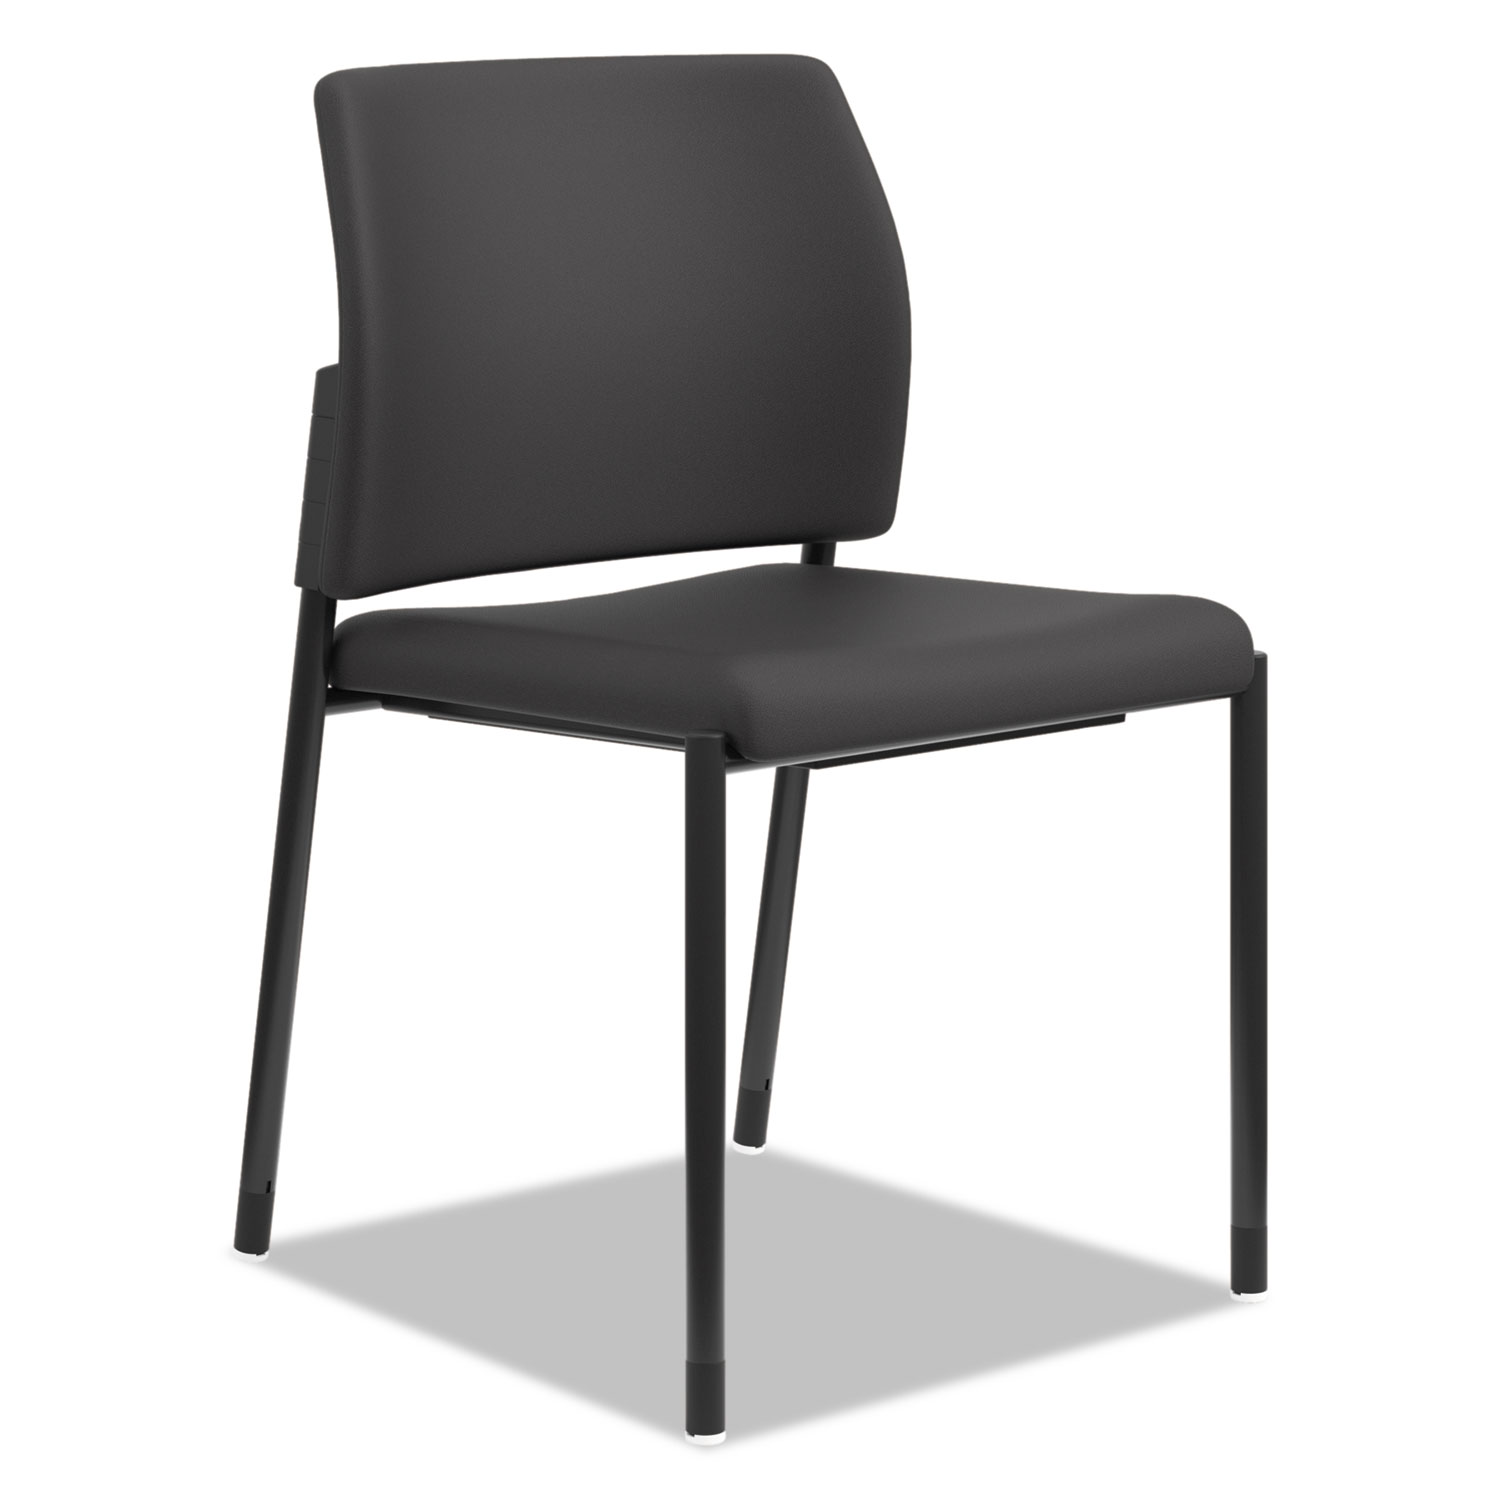 Accommodate™ Series Armless Guest Chair, Black Fabric